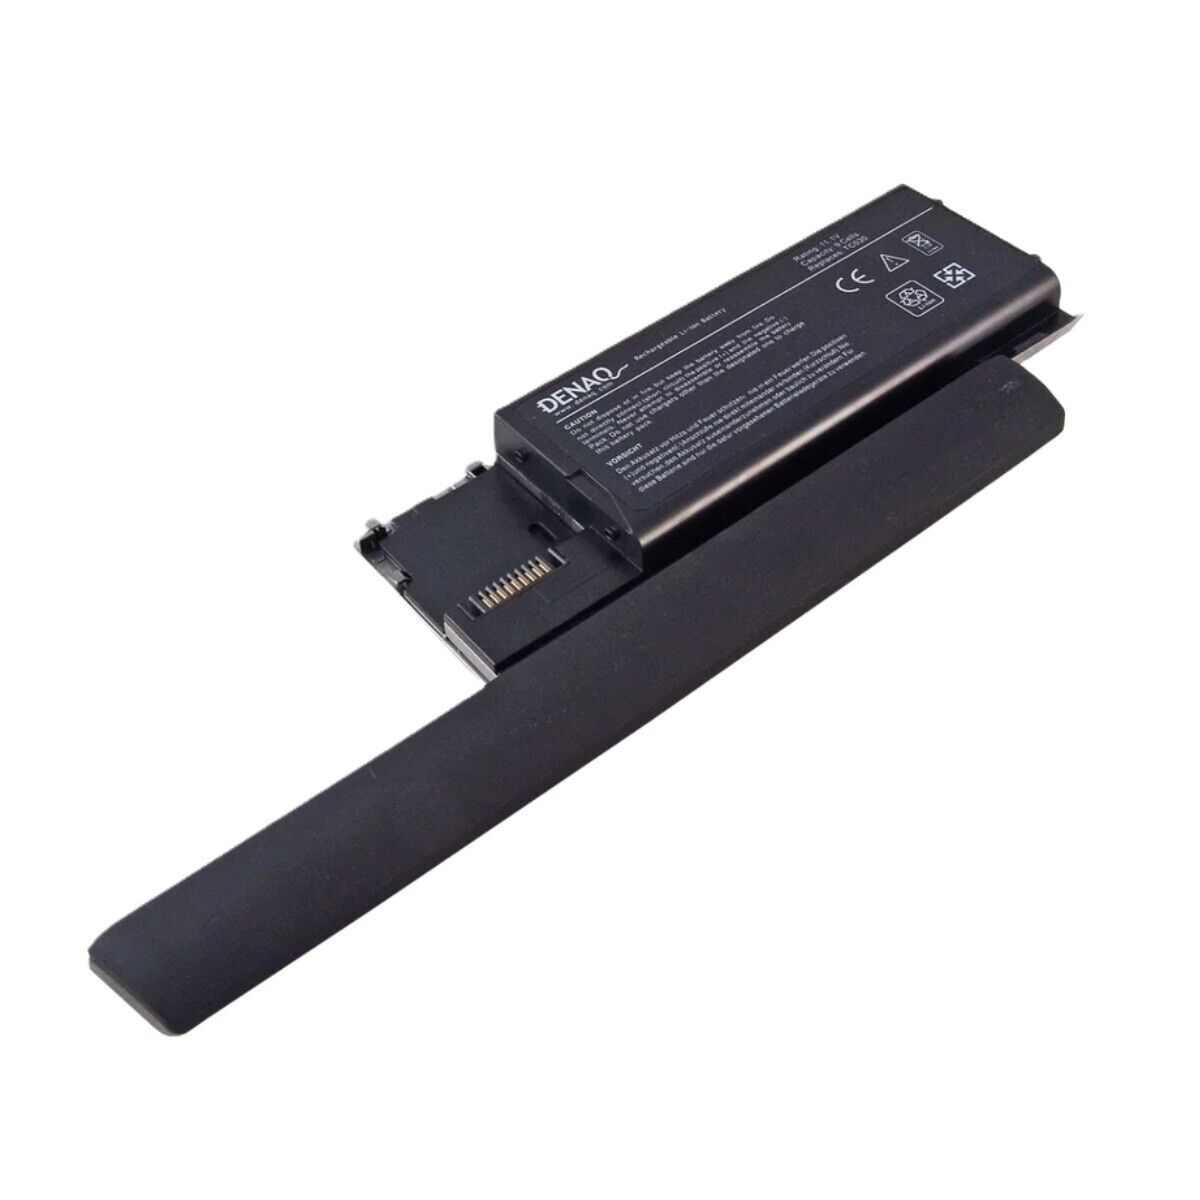 DENAQ - 9-Cell Lithium-Ion Battery for Dell D630